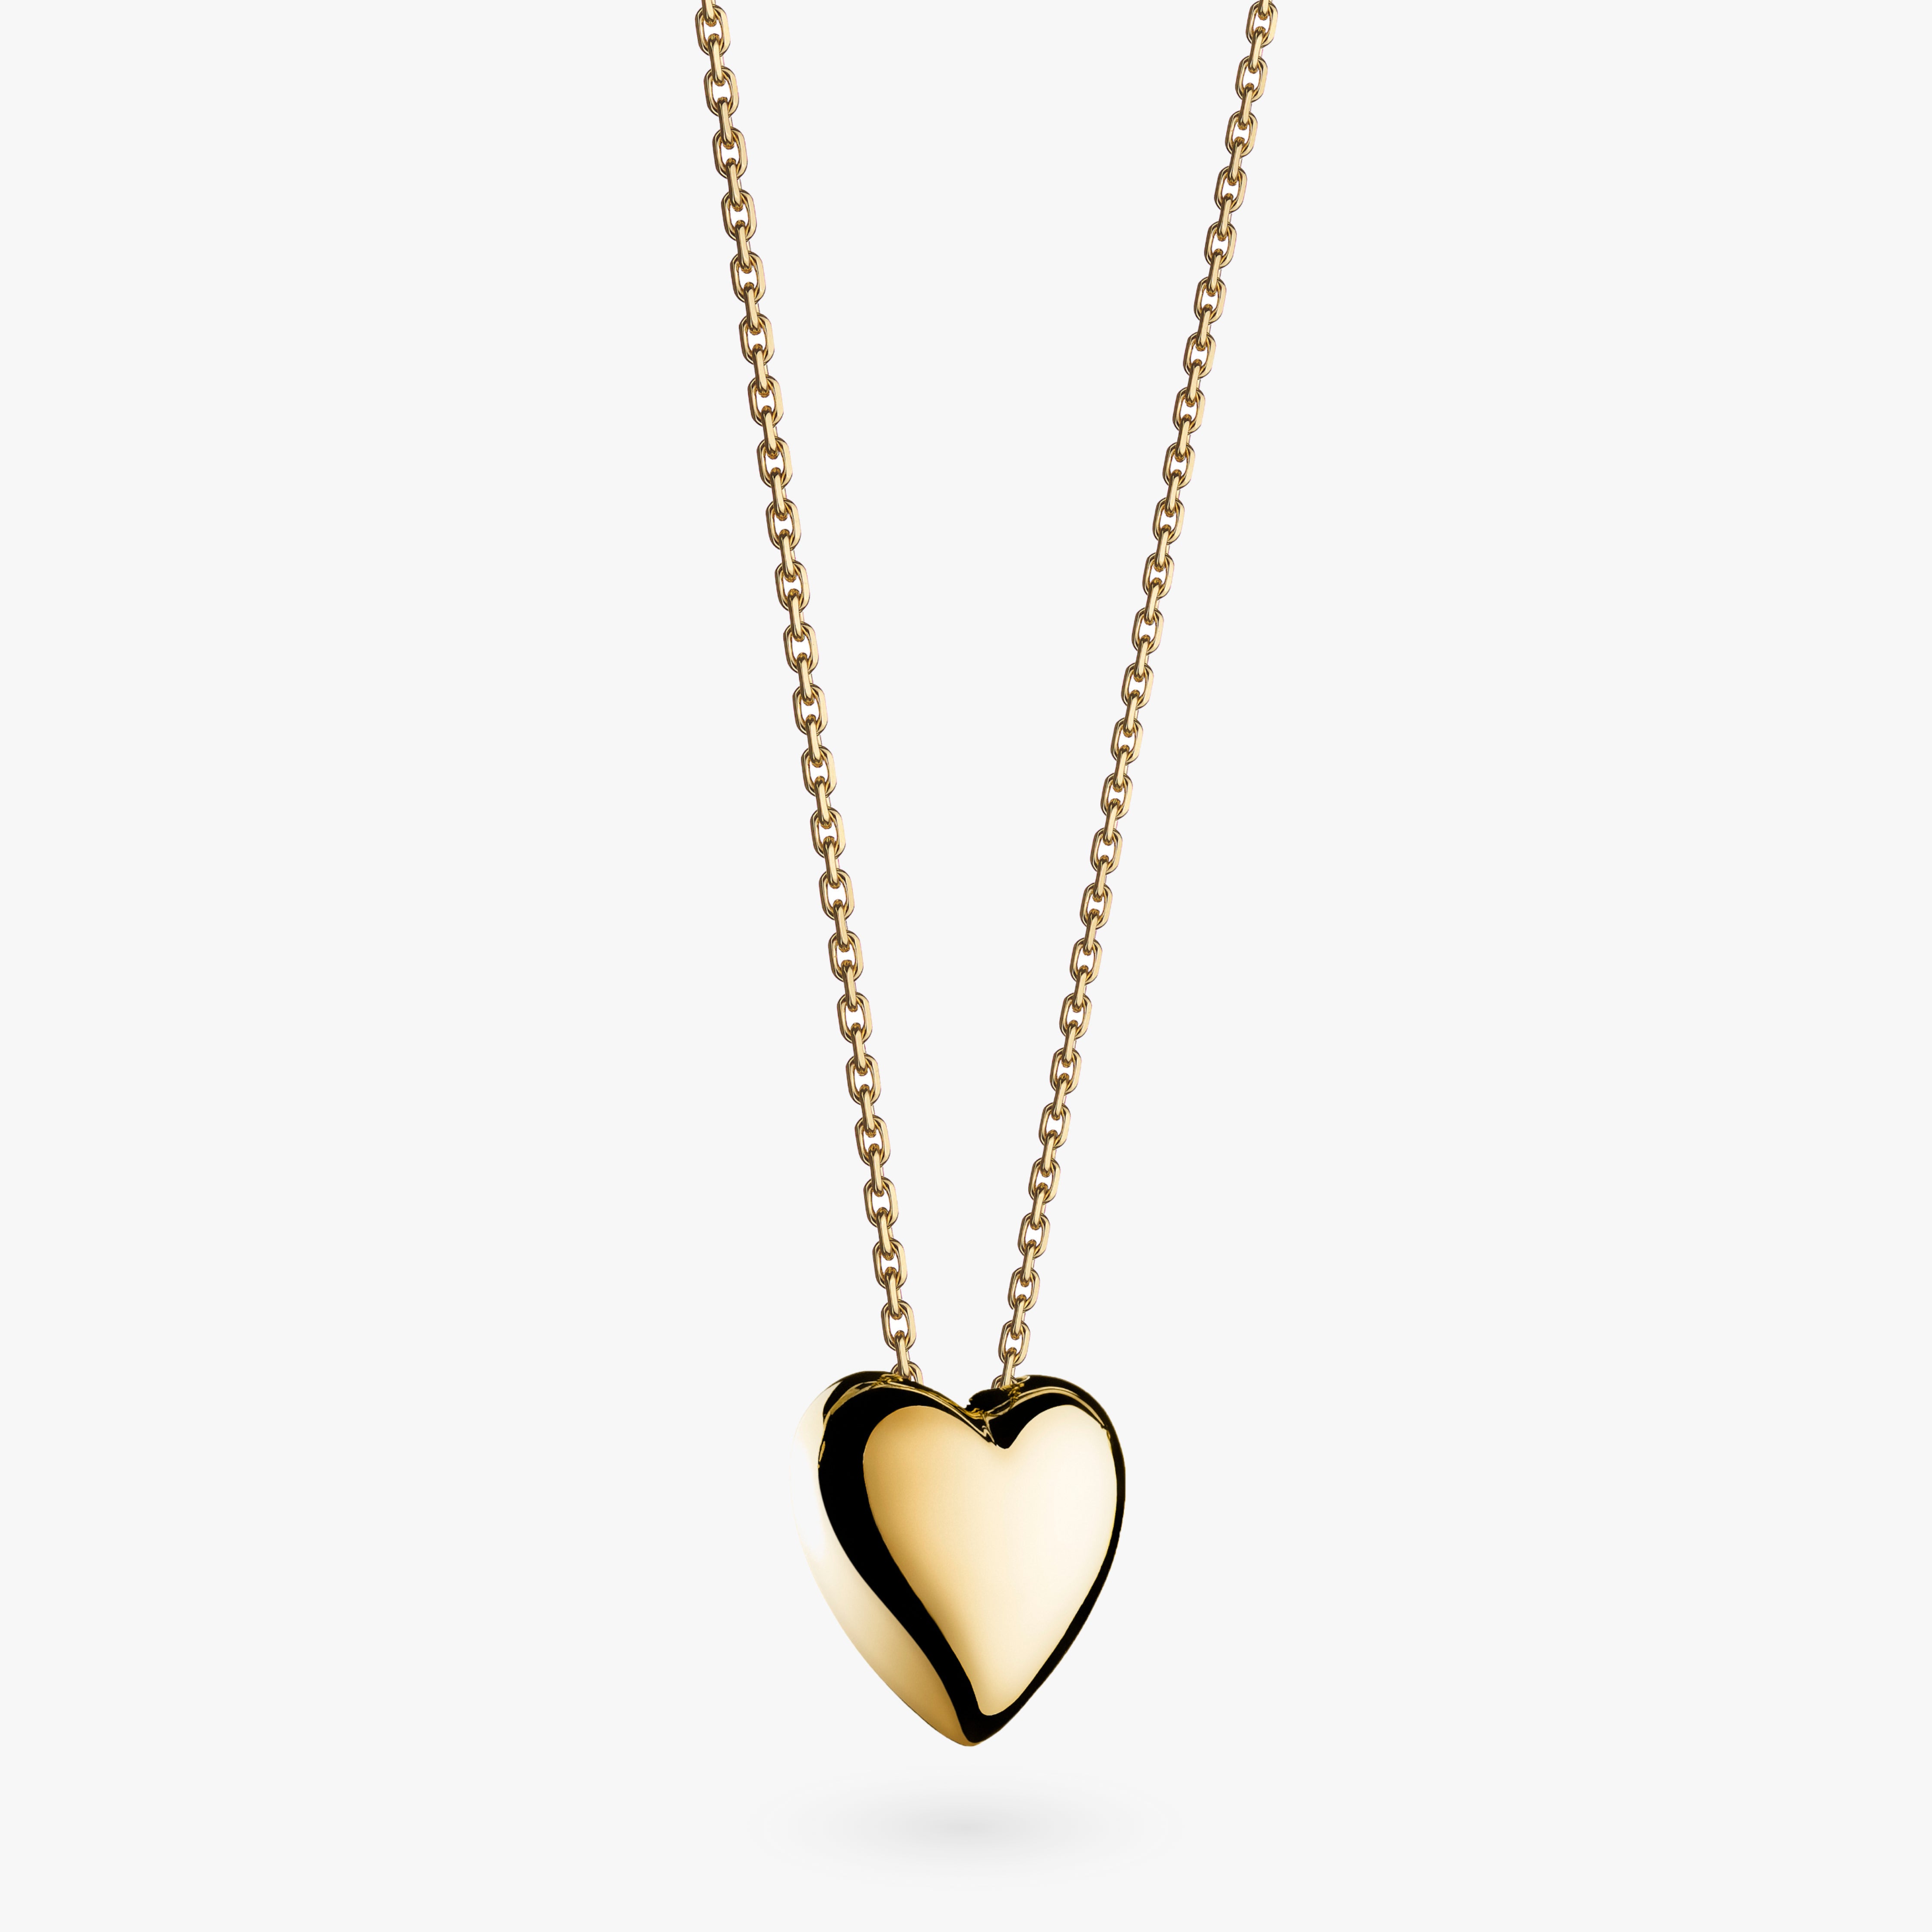 Big gold heart necklace